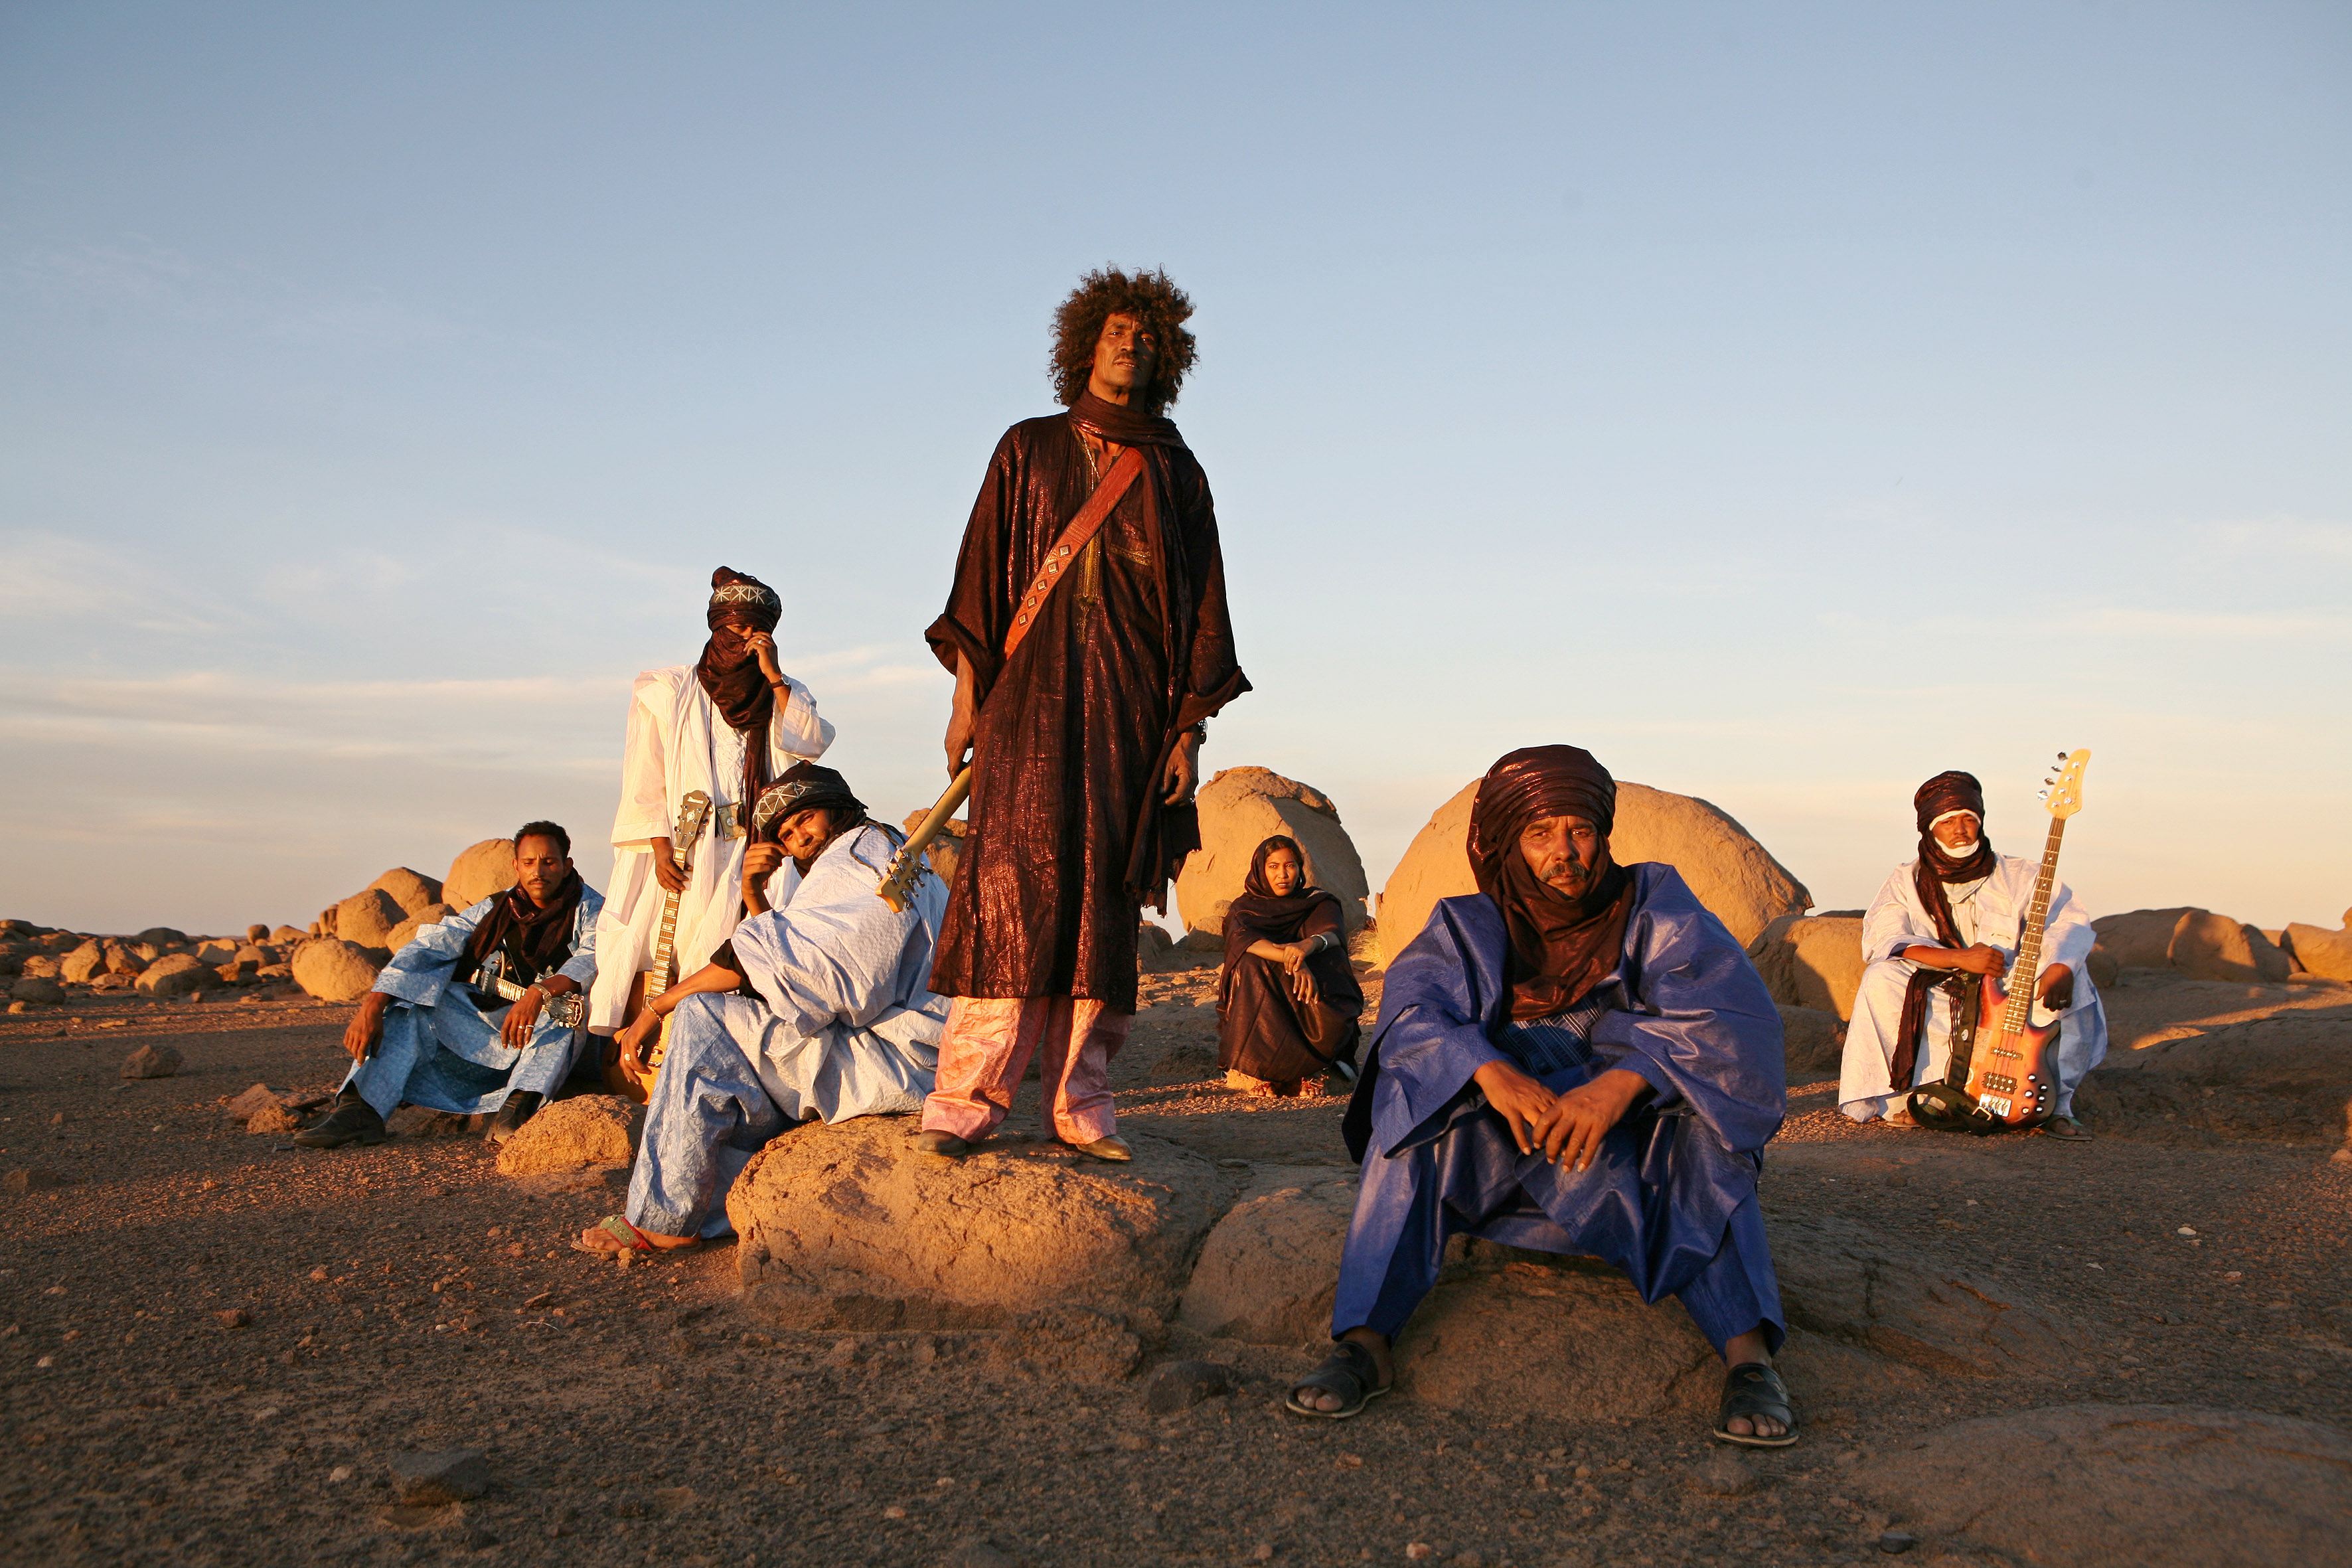 The members of Tinariwen, some sitting and some standing, each wearing long flowing robes. They pose against a desert scene populated by large rocks